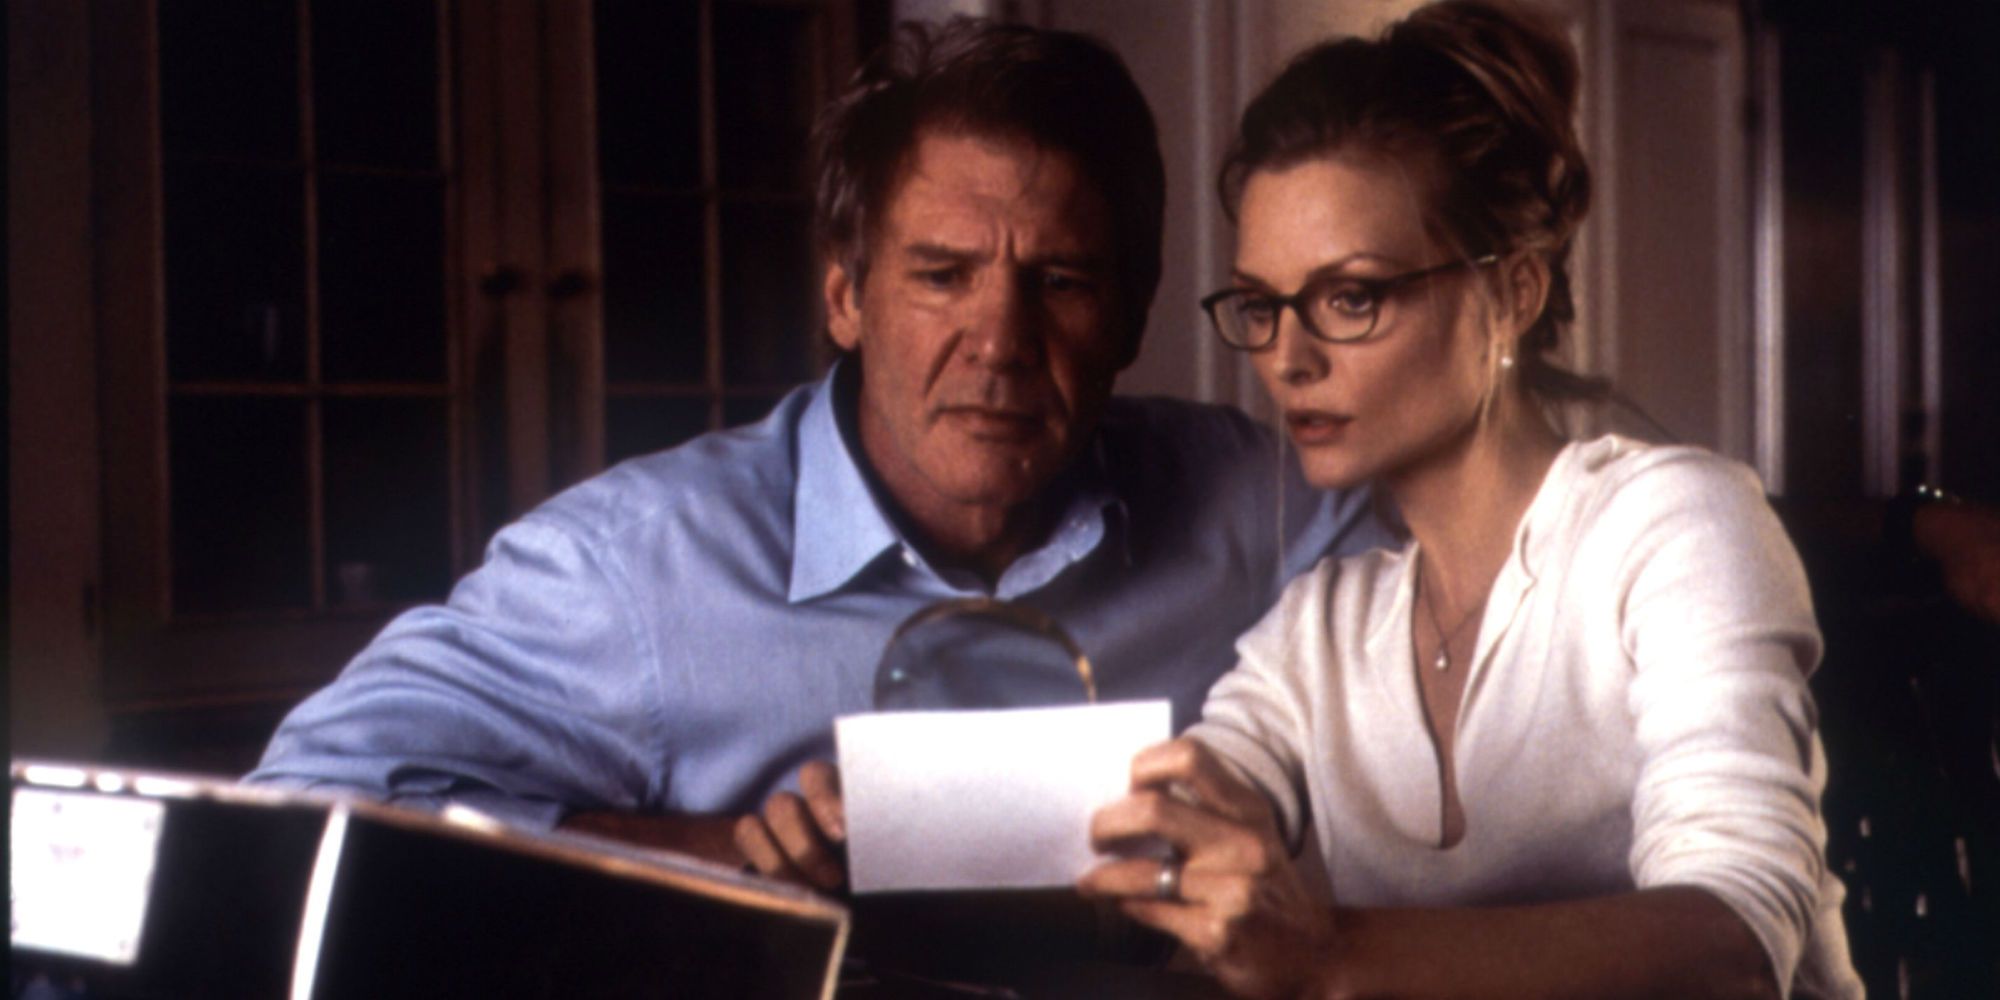 Harrison Ford and Michelle Pfeiffer in What Lies Beneath investigating the missing person photo 